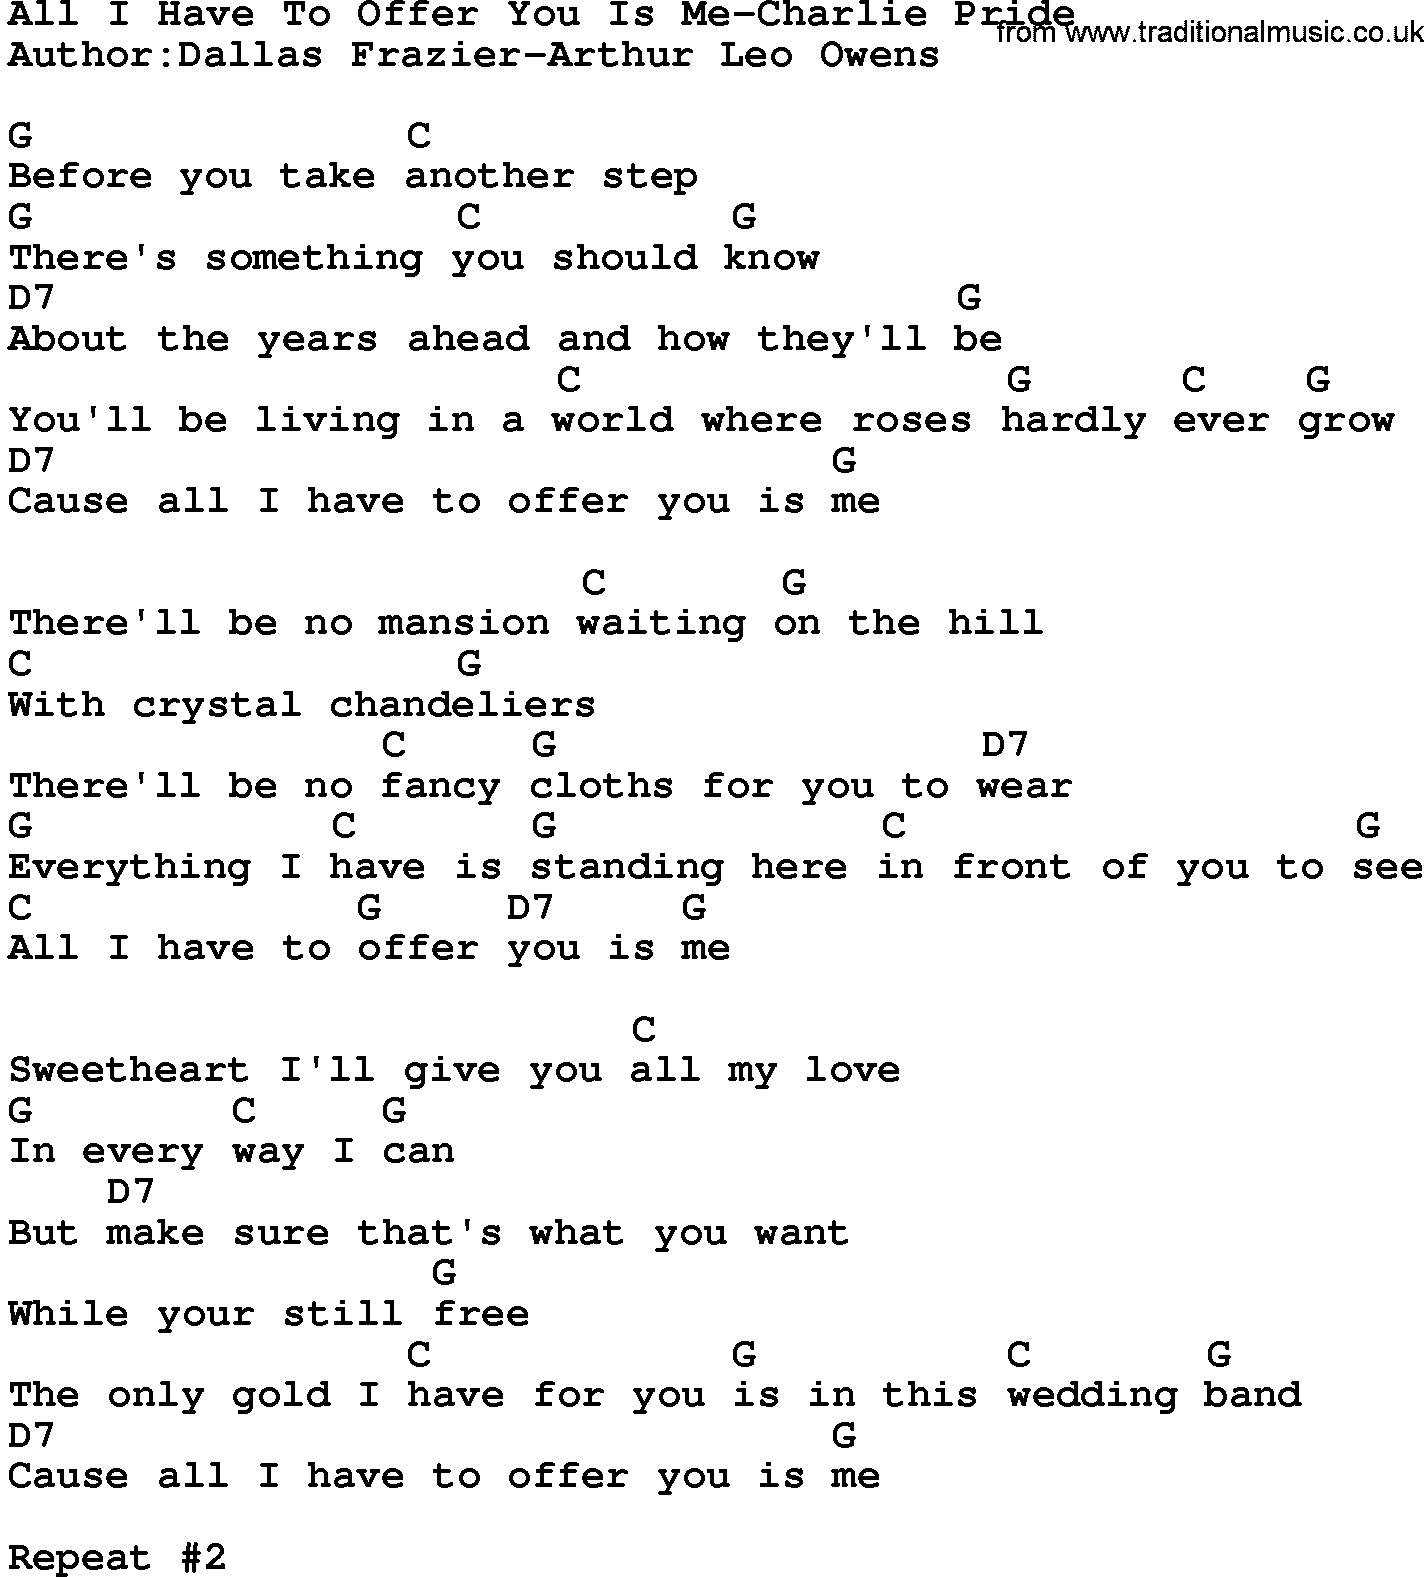 Country music song: All I Have To Offer You Is Me-Charlie Pride lyrics and chords